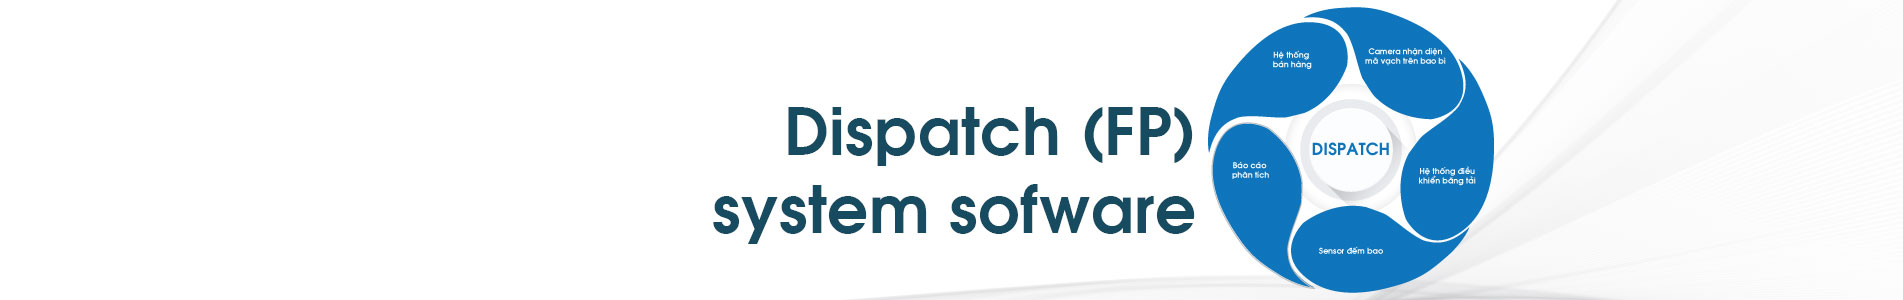 Dispatch (FP) system sofware